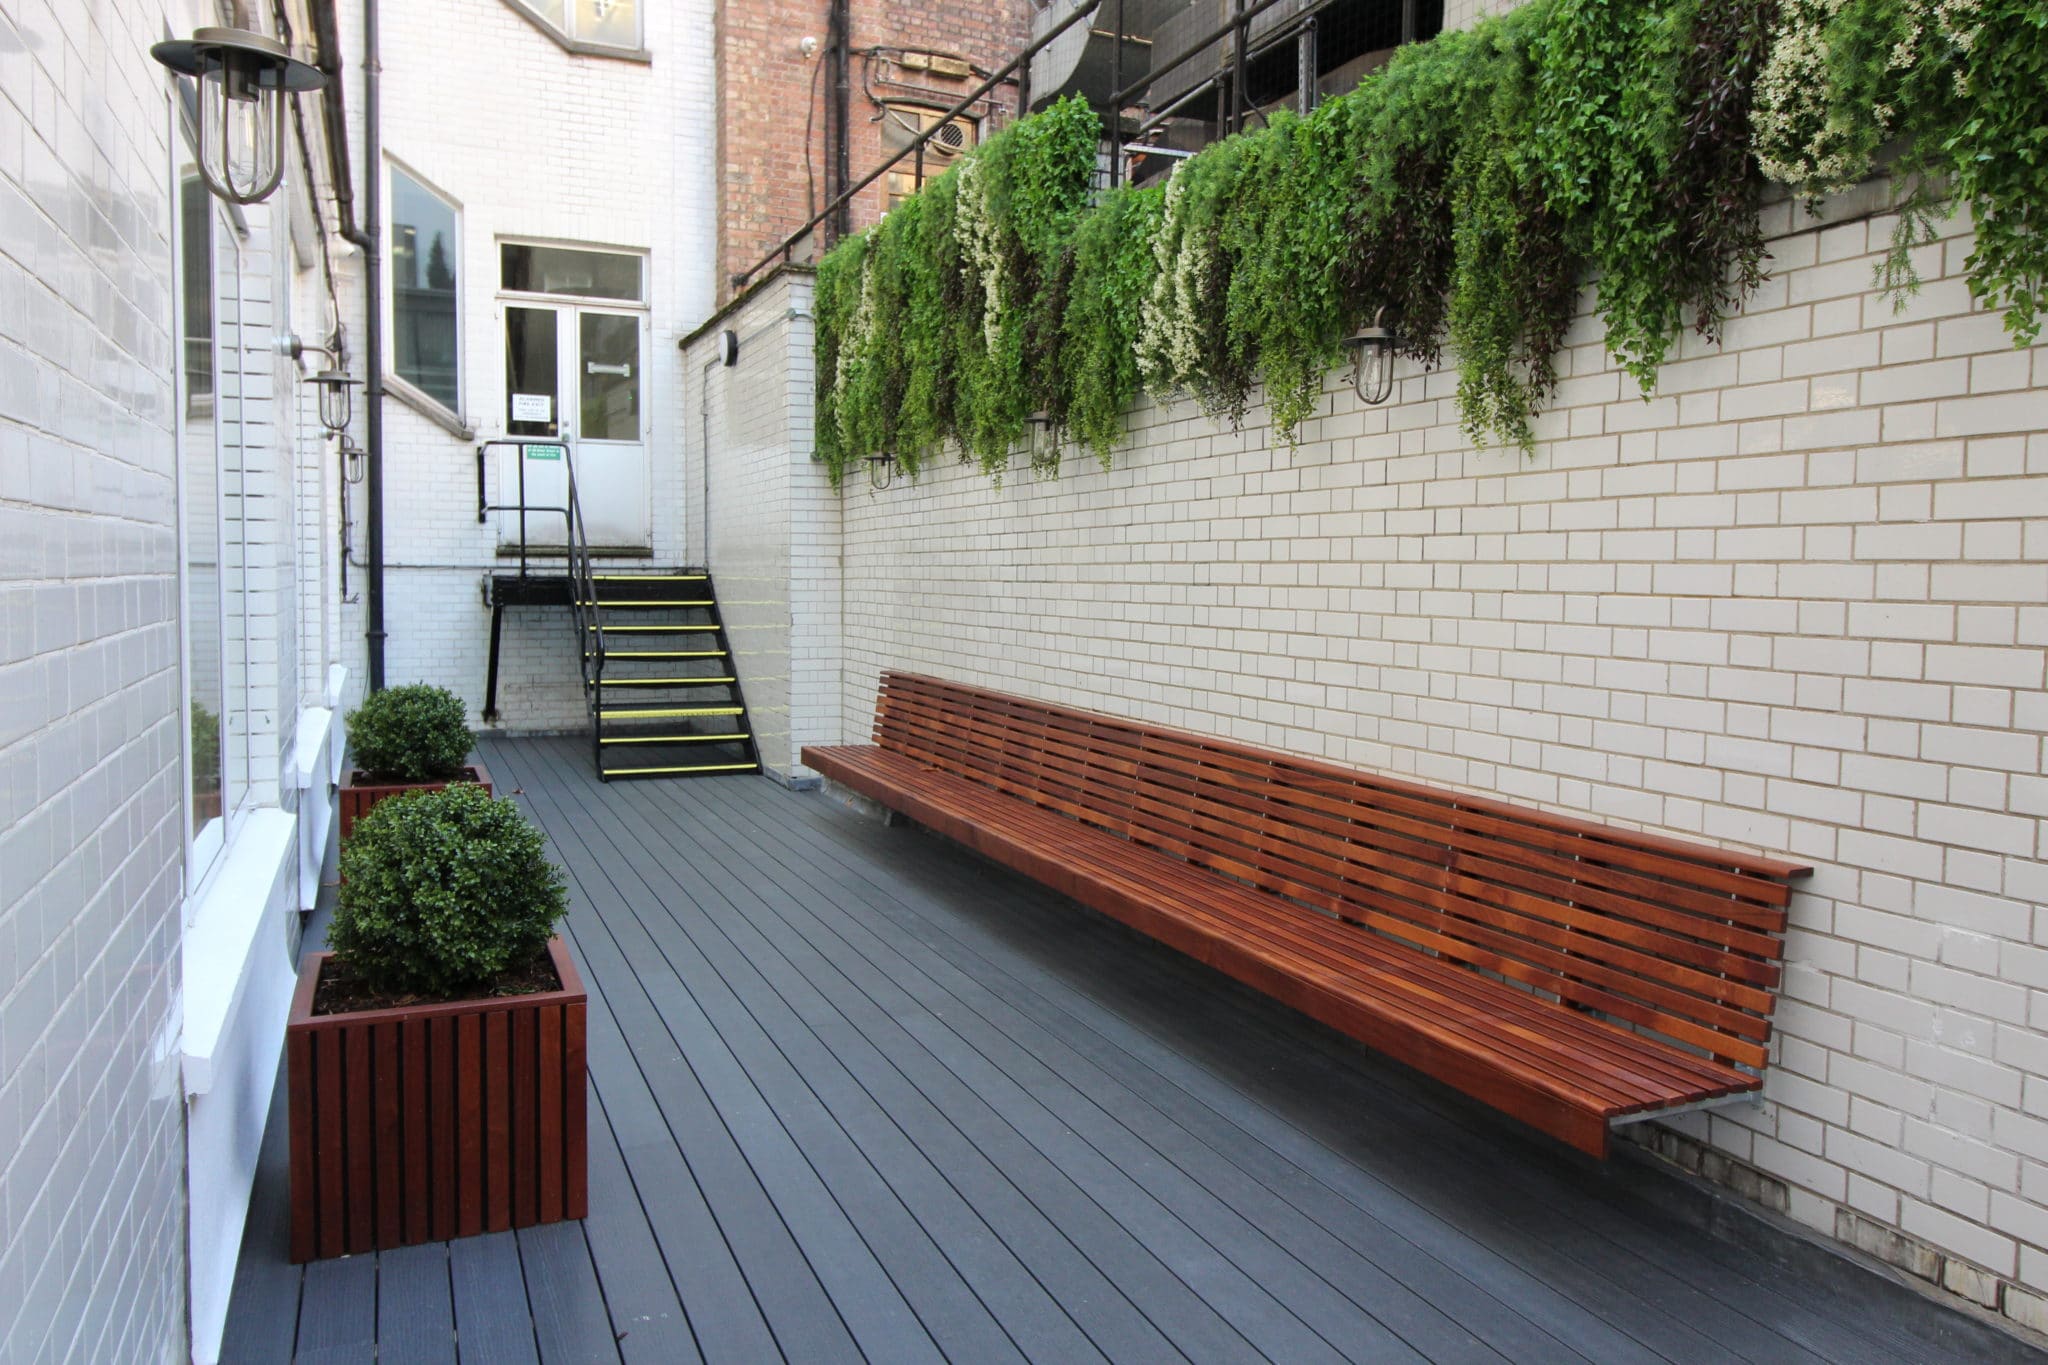 Commercial composite decking installation, Mayfair